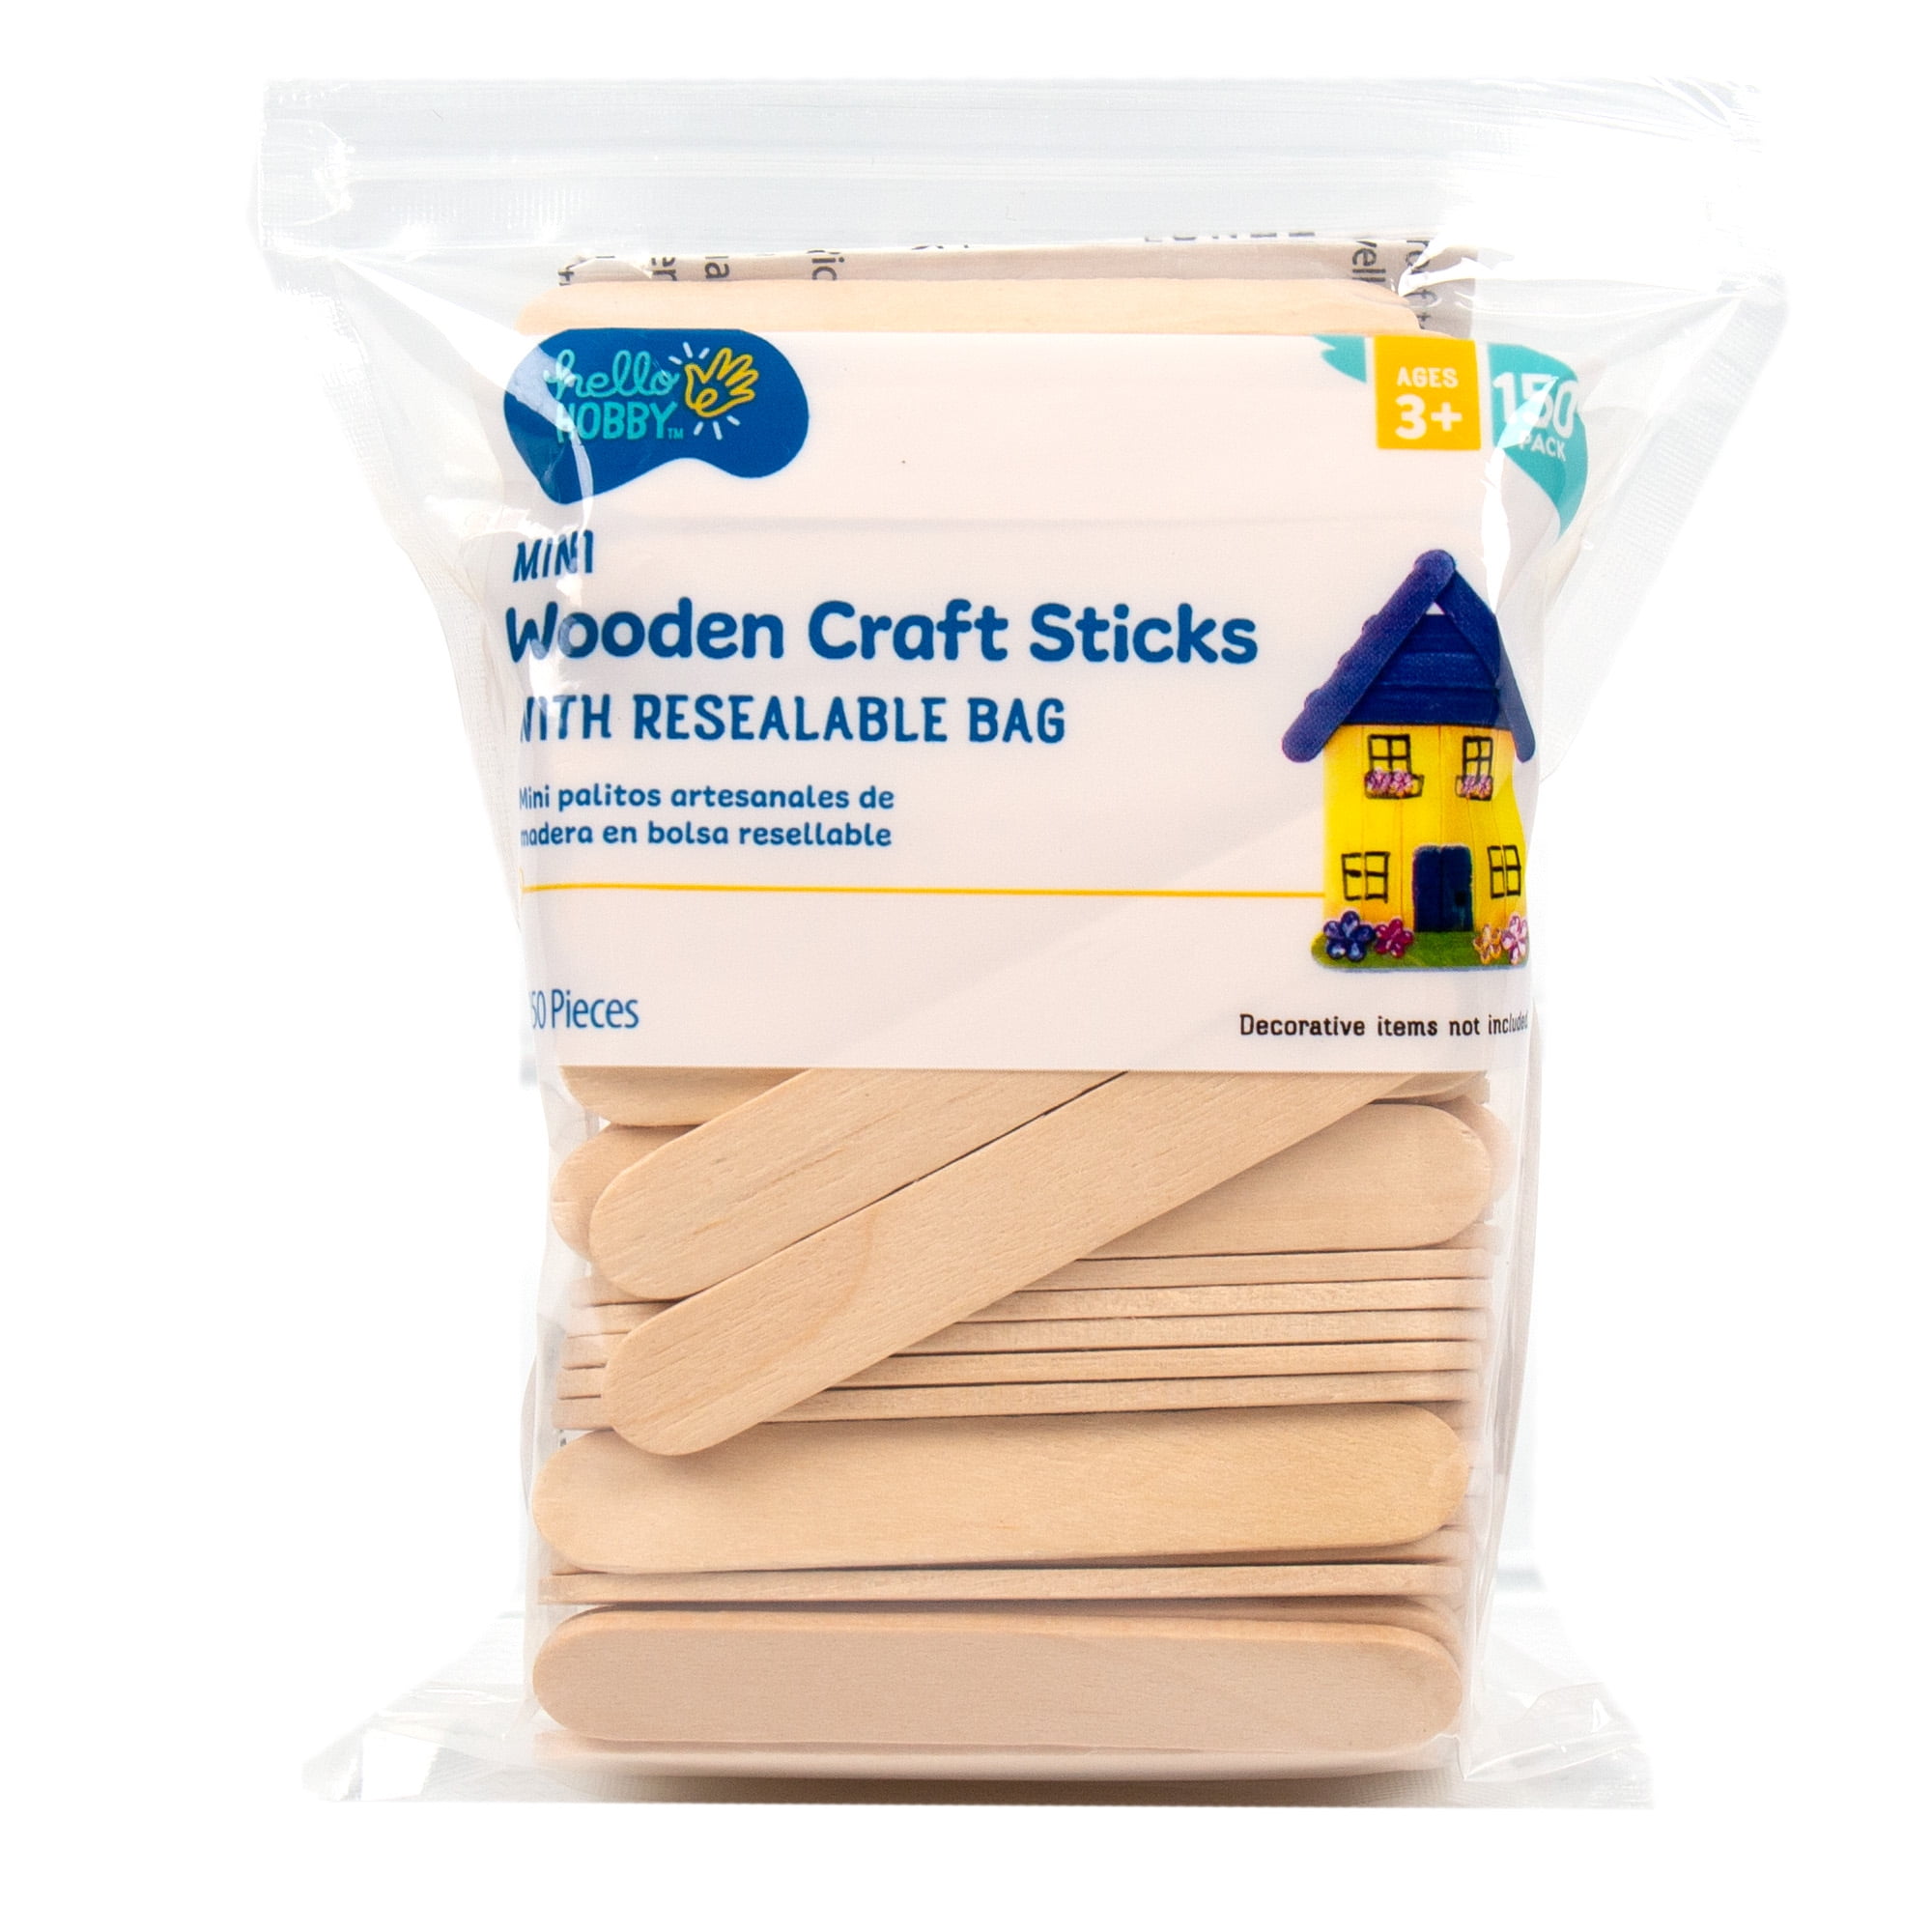 Hello Hobby Mini Wood Craft Sticks with Resealable Bag, 150-Pack